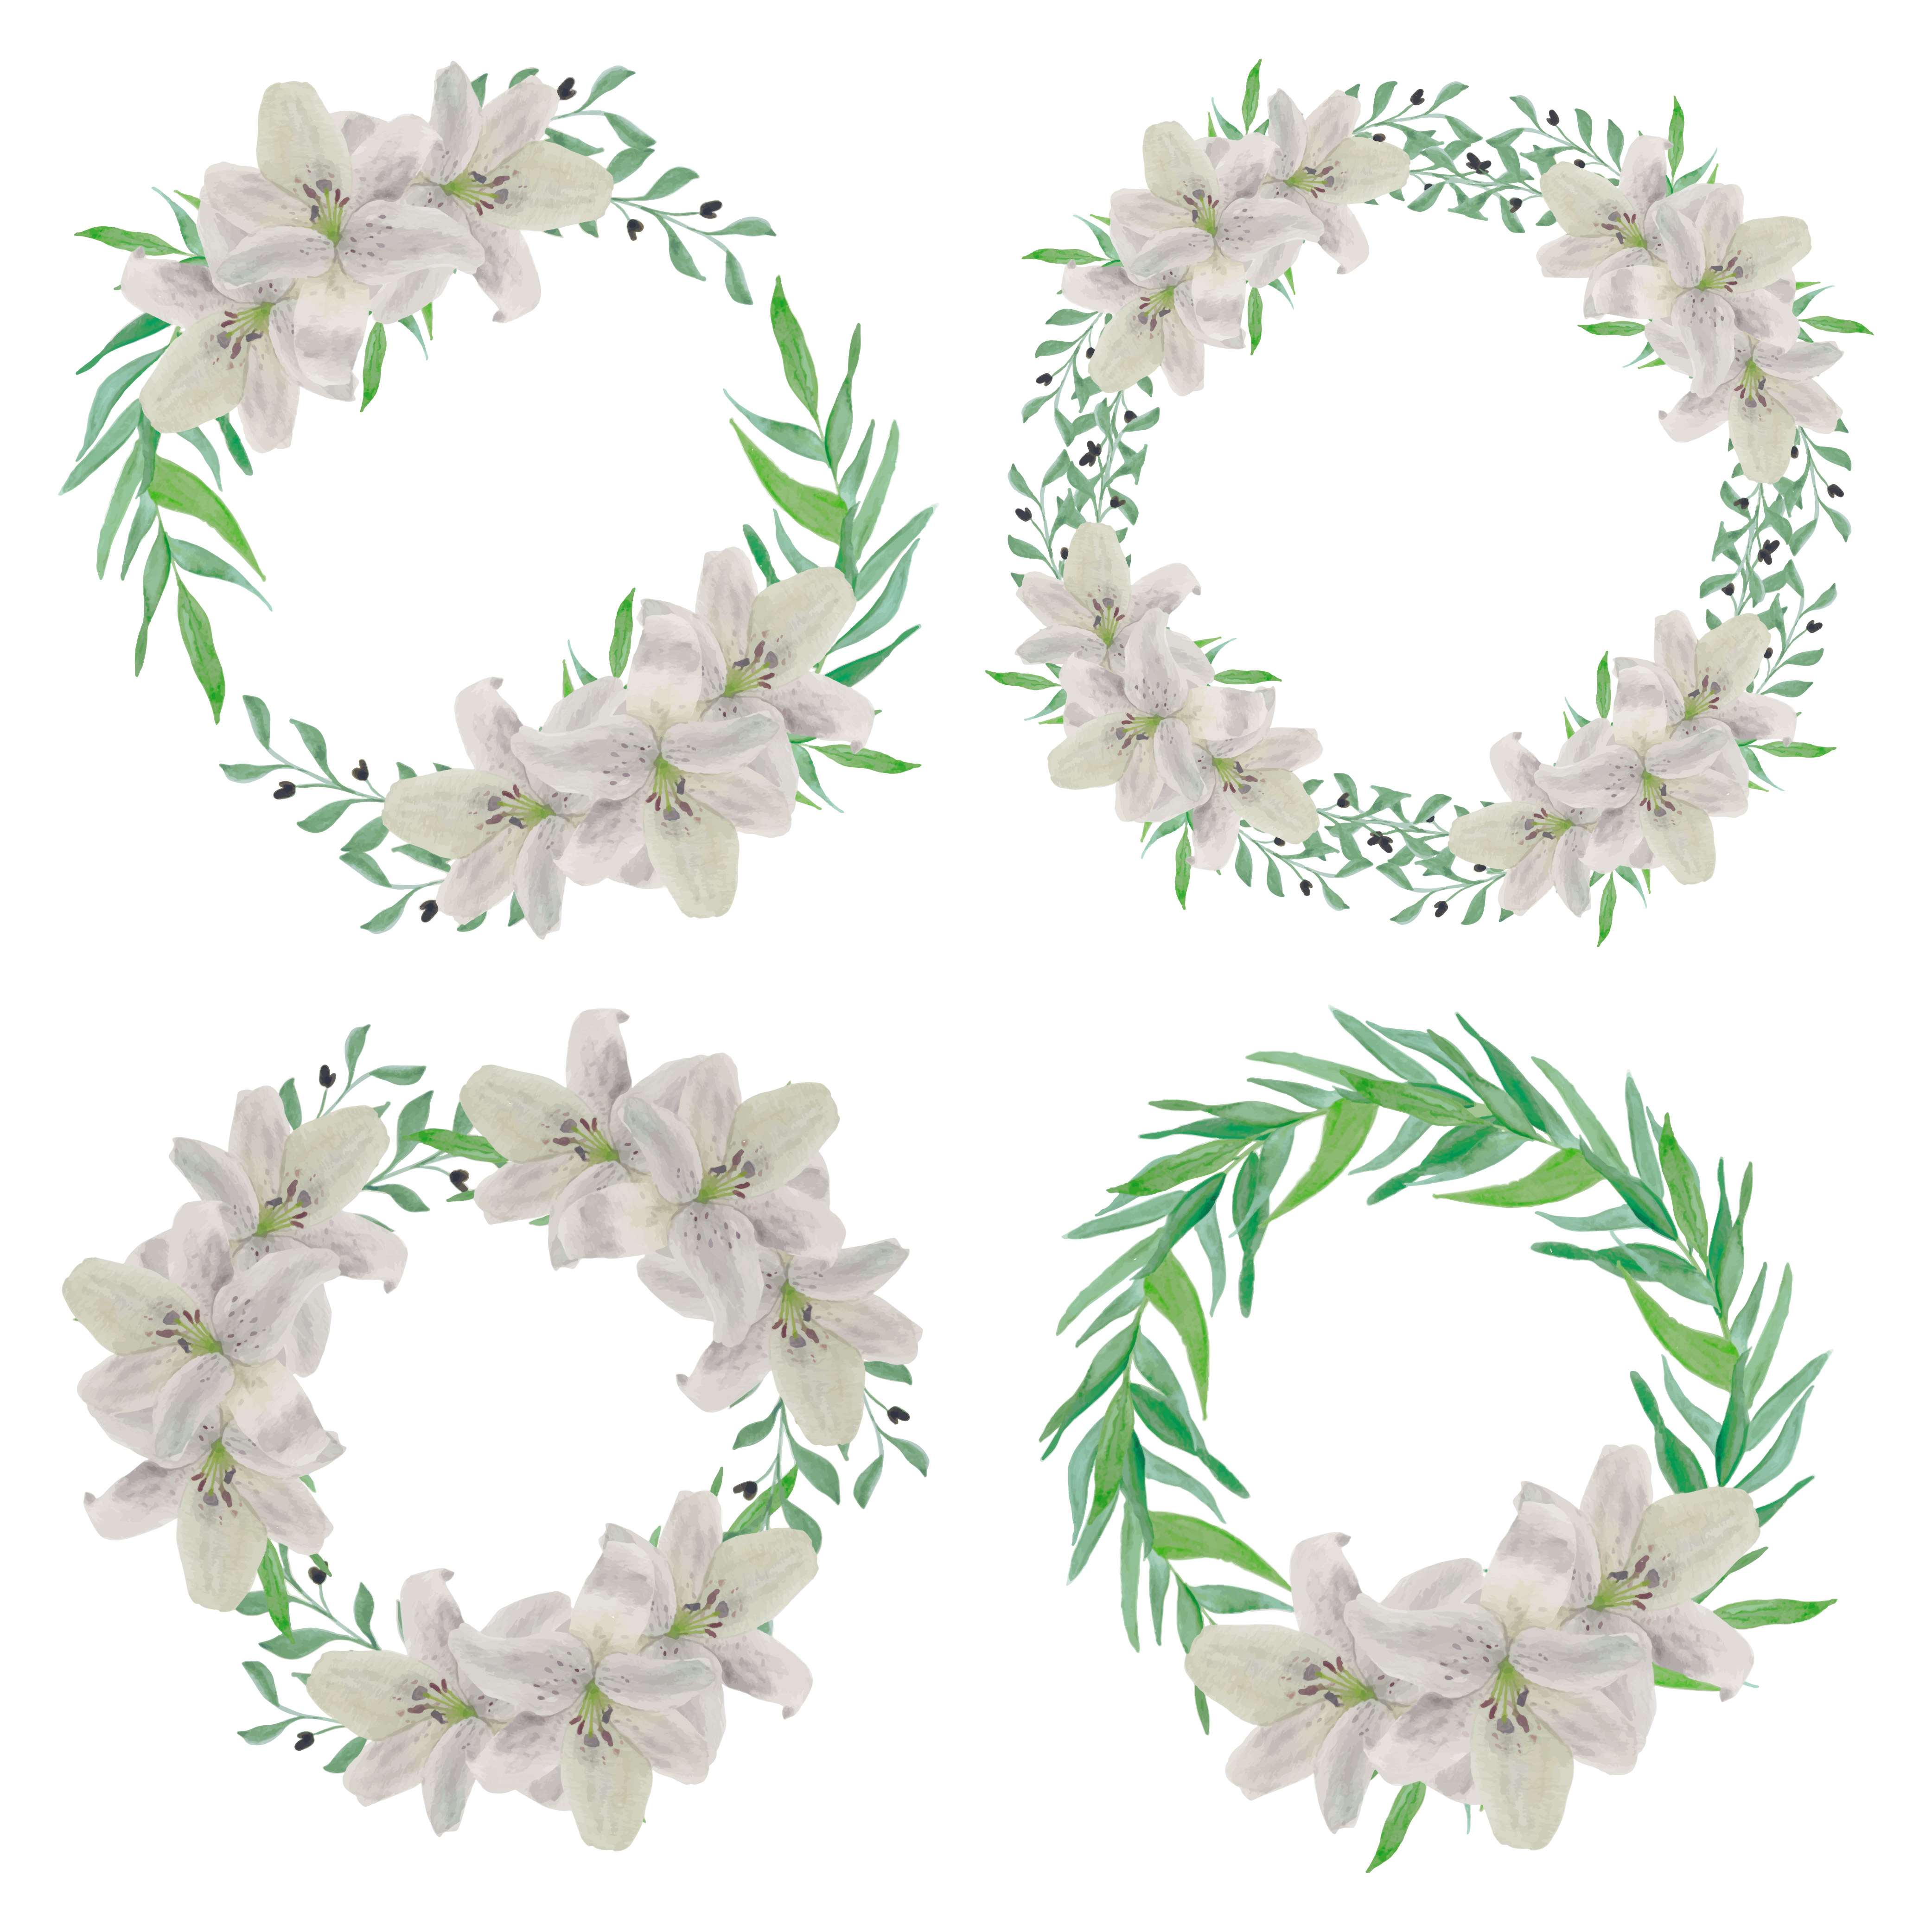 Download White lily flower circle frame watercolor set - Download Free Vectors, Clipart Graphics & Vector Art